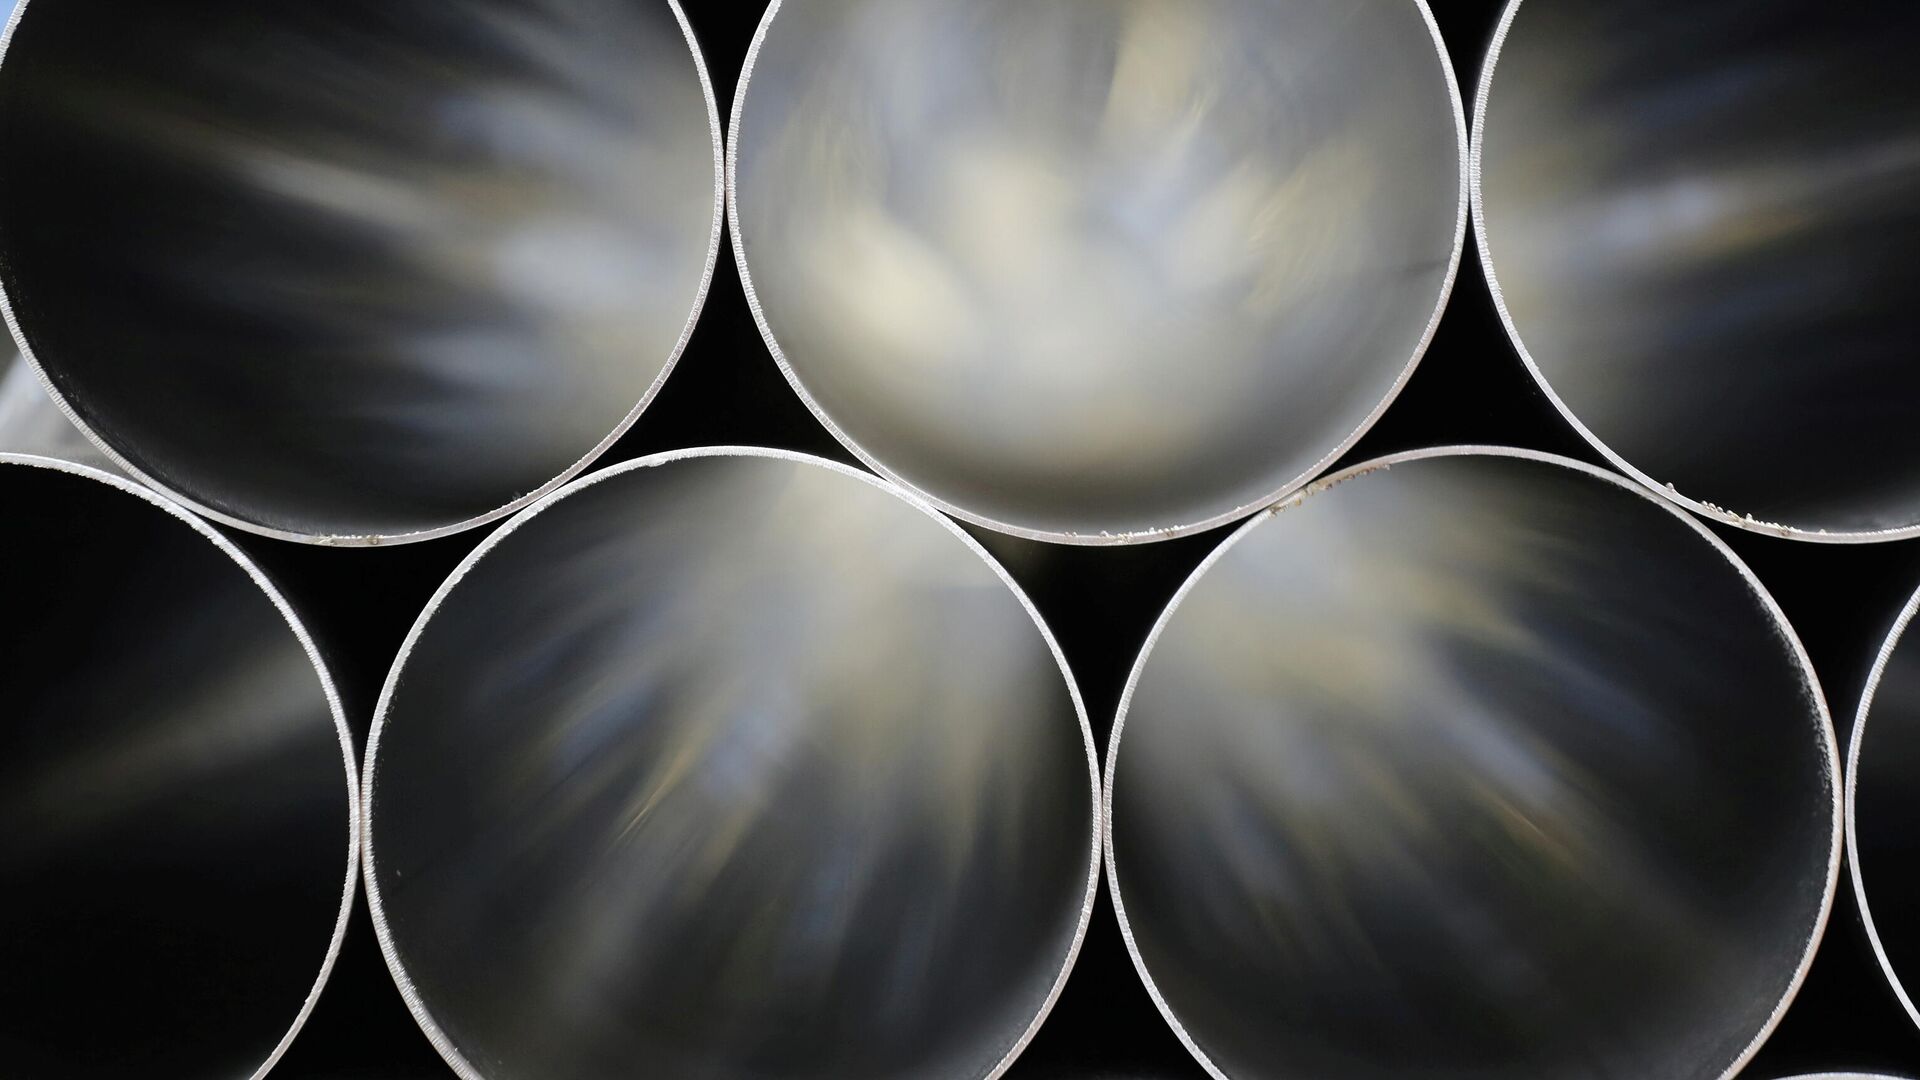 FILE PHOTO: Stainless steel tubes are stored ready to be made into exhausts at the Eminox factory, during a post-Budget visit by Britain's Chancellor of the Exchequer Philip Hammond, in Gainsborough, - Sputnik International, 1920, 11.10.2021